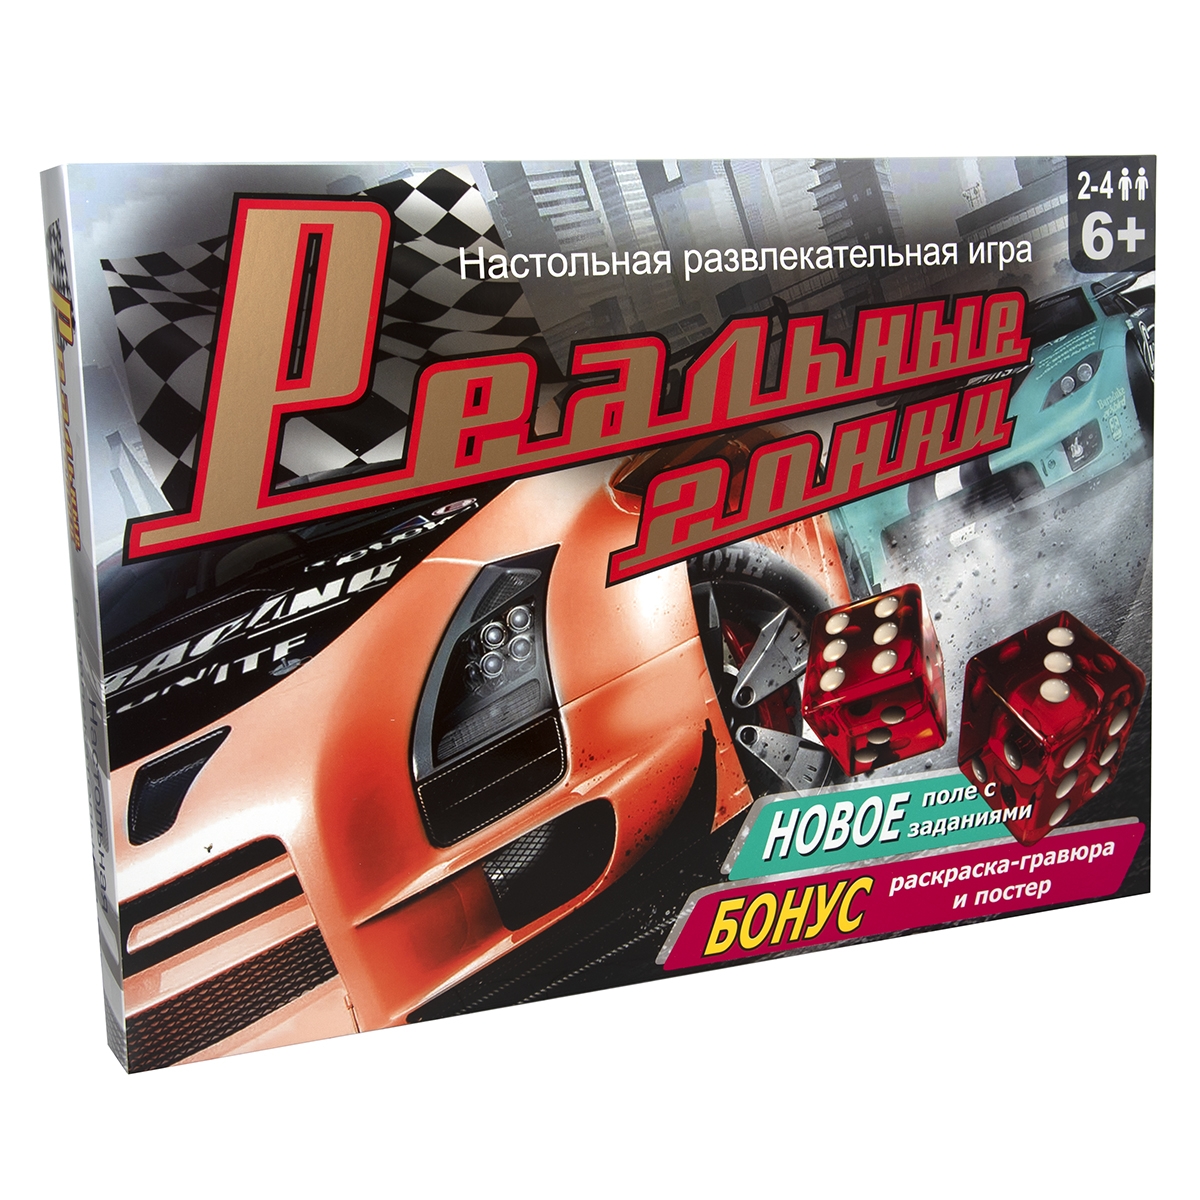 The game "Real racing" (Russian) (40014)